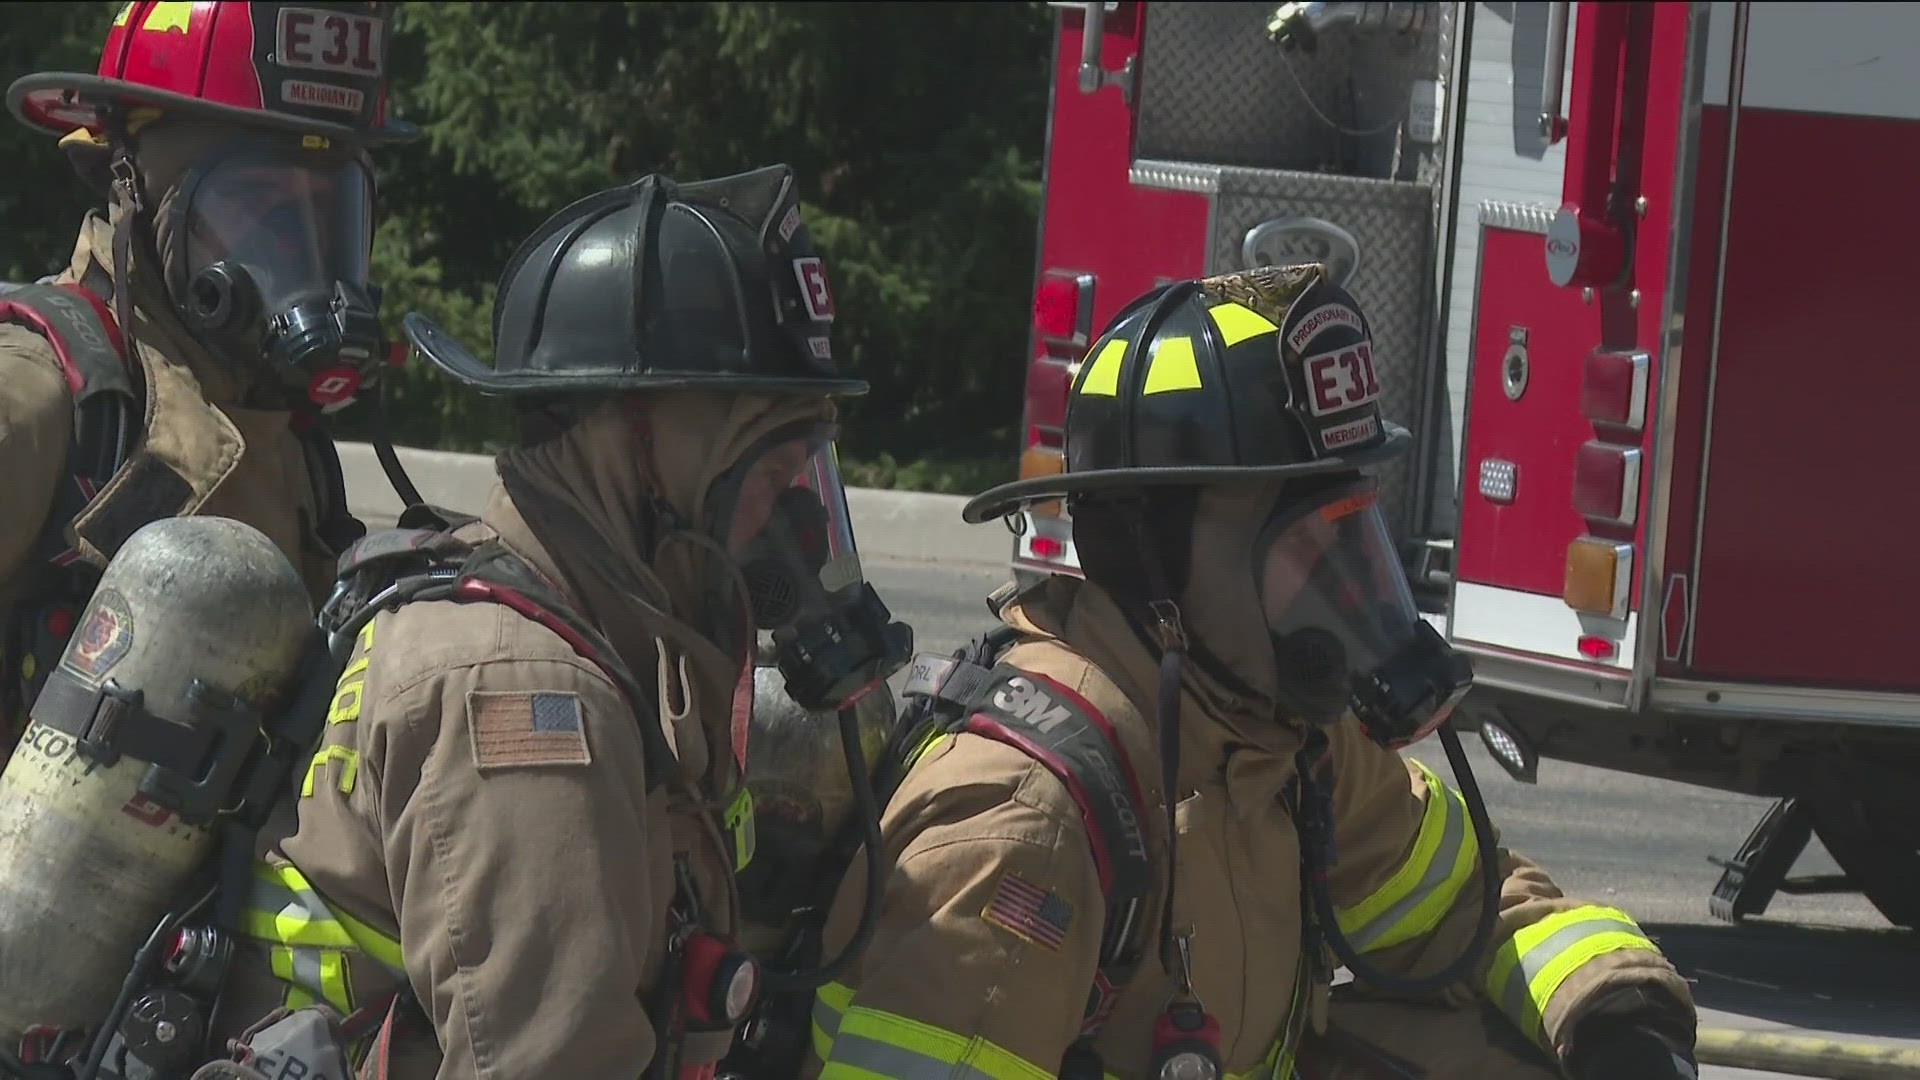 The Meridian Fire Department's biggest challenges it struggles with currently are response time and staffing.